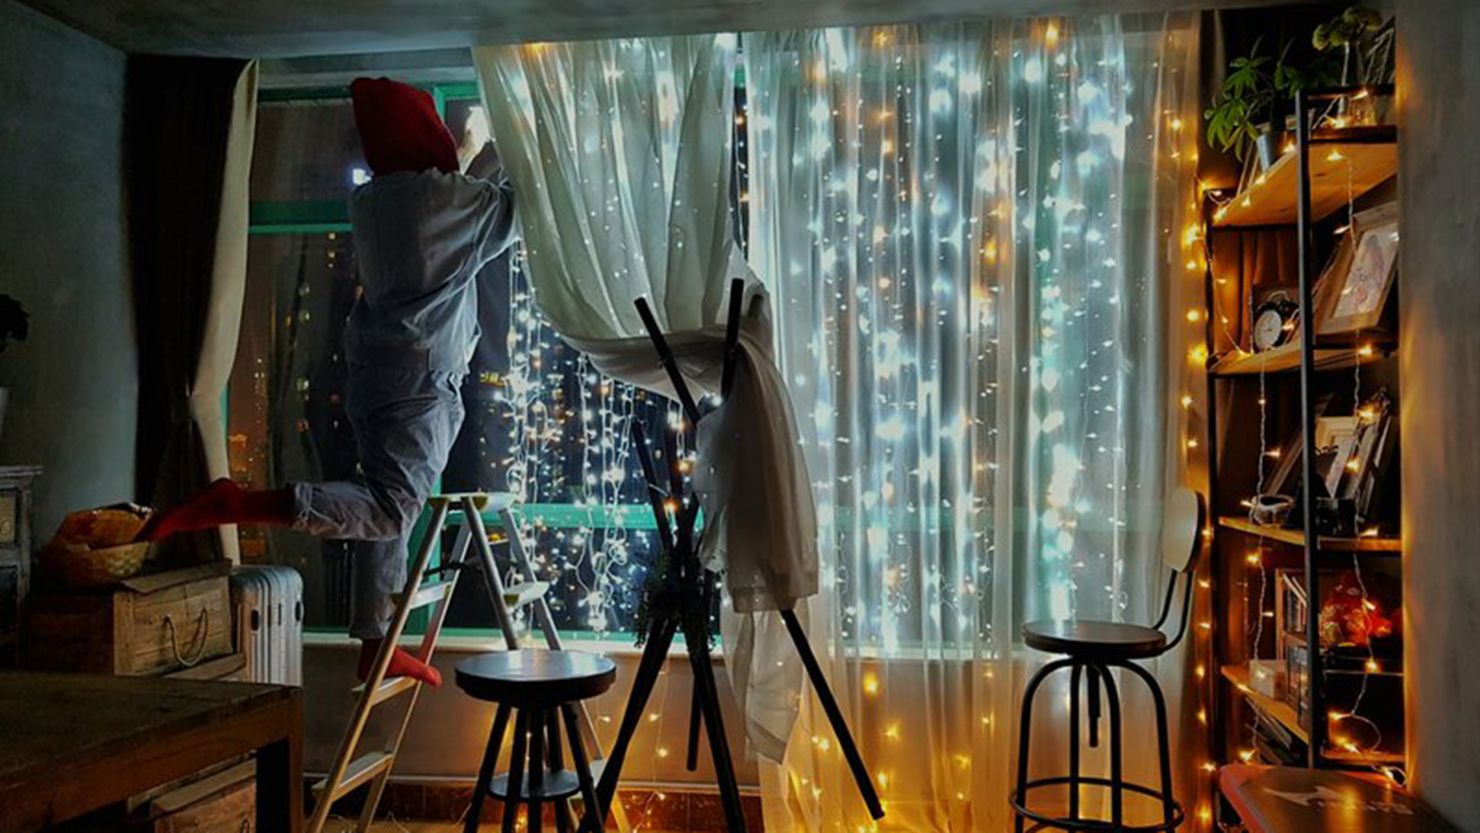 How to DIY clap on/off lights for my bedroom - Quora